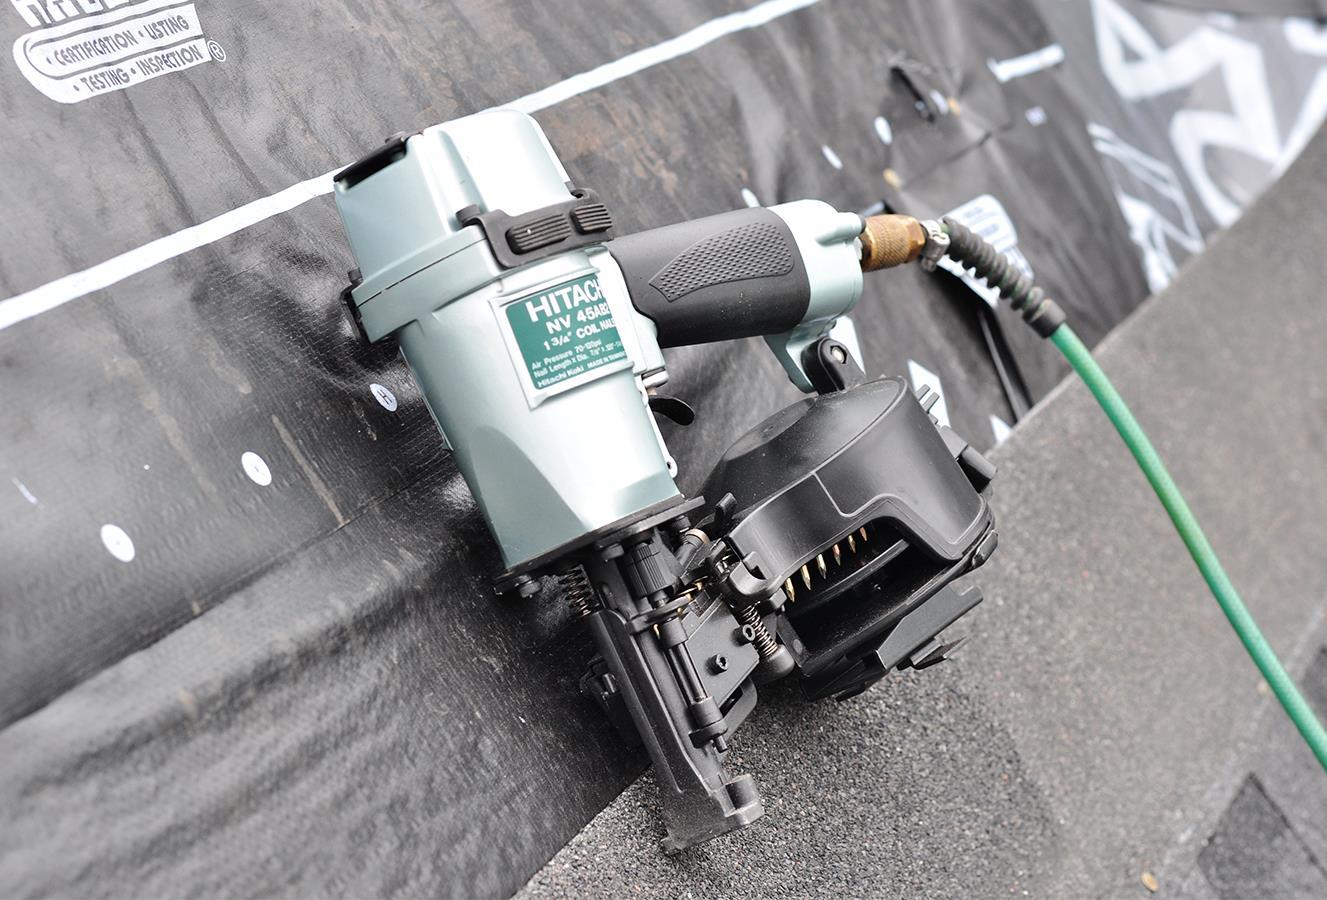 Hitachi NV45AB2 Coil Roofing Nailer